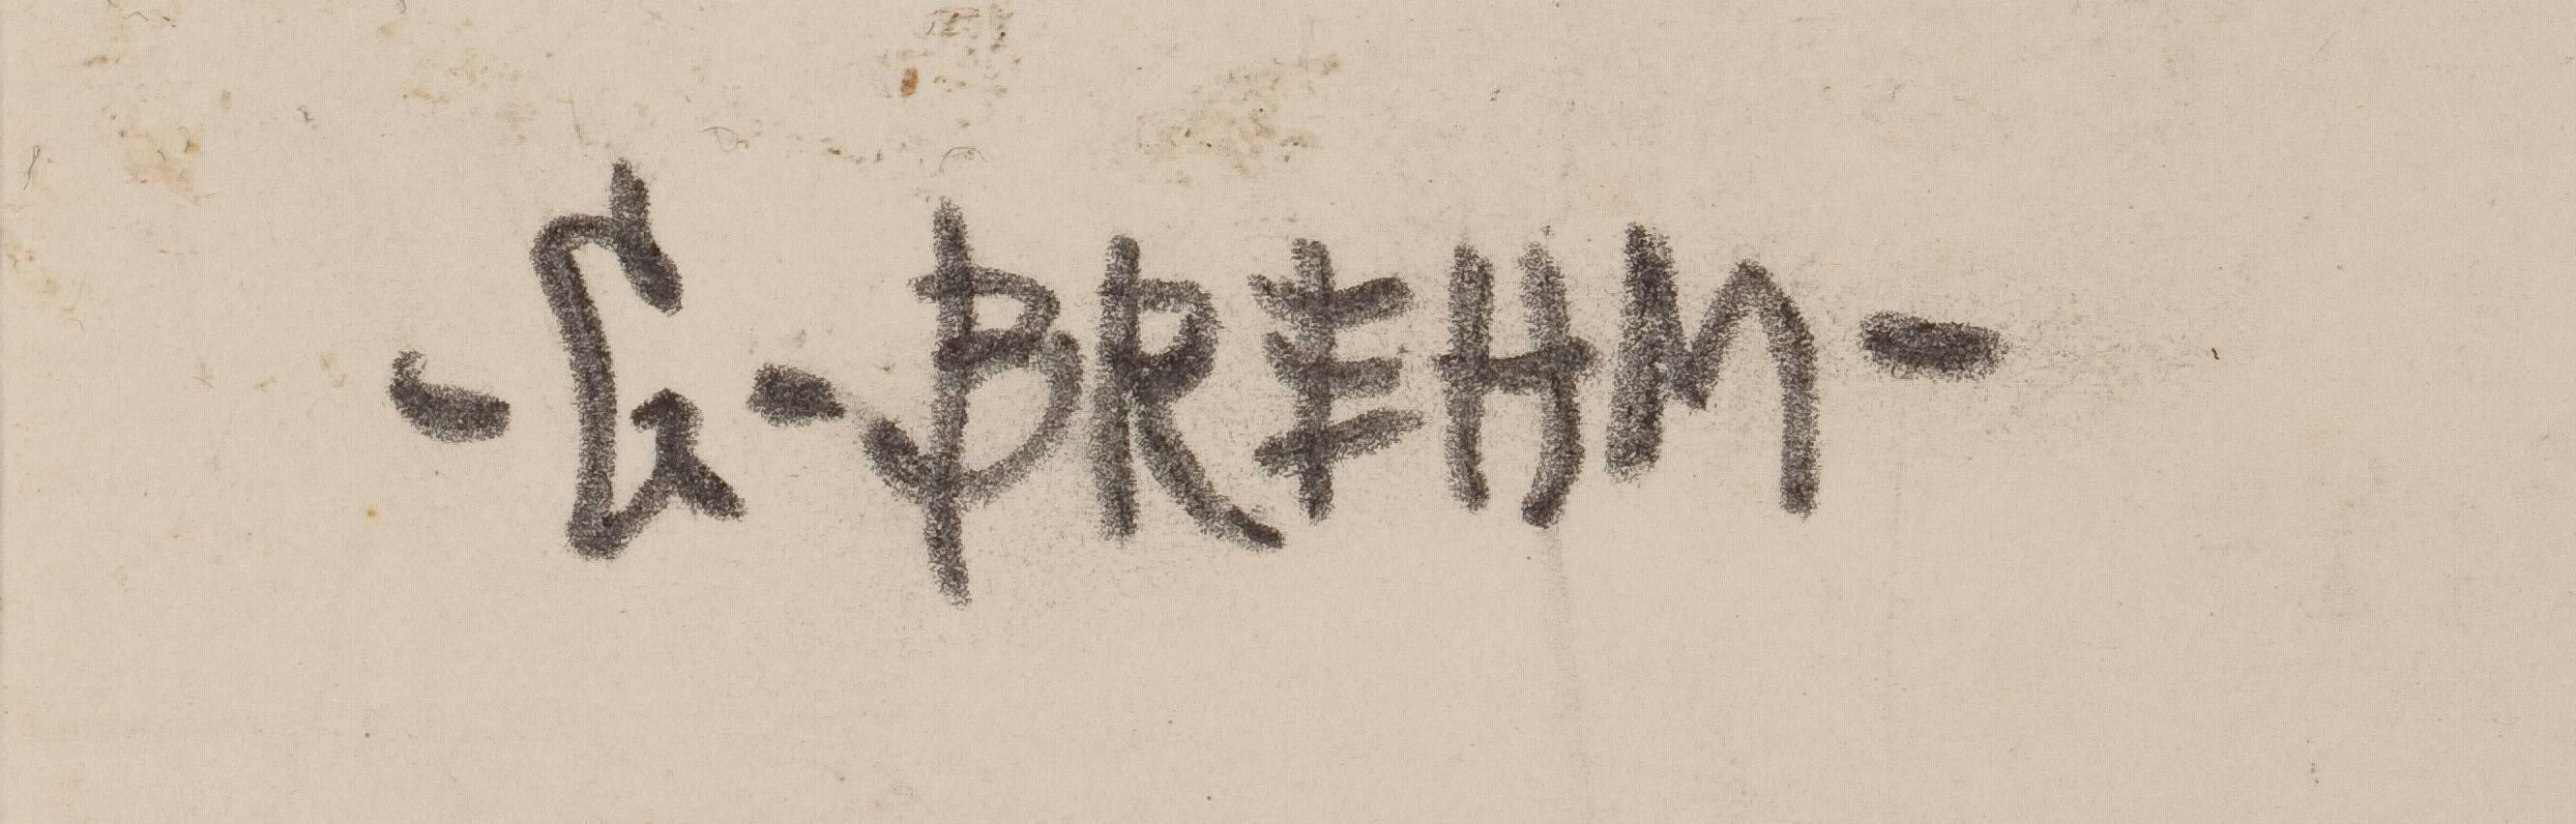 brehm meaning